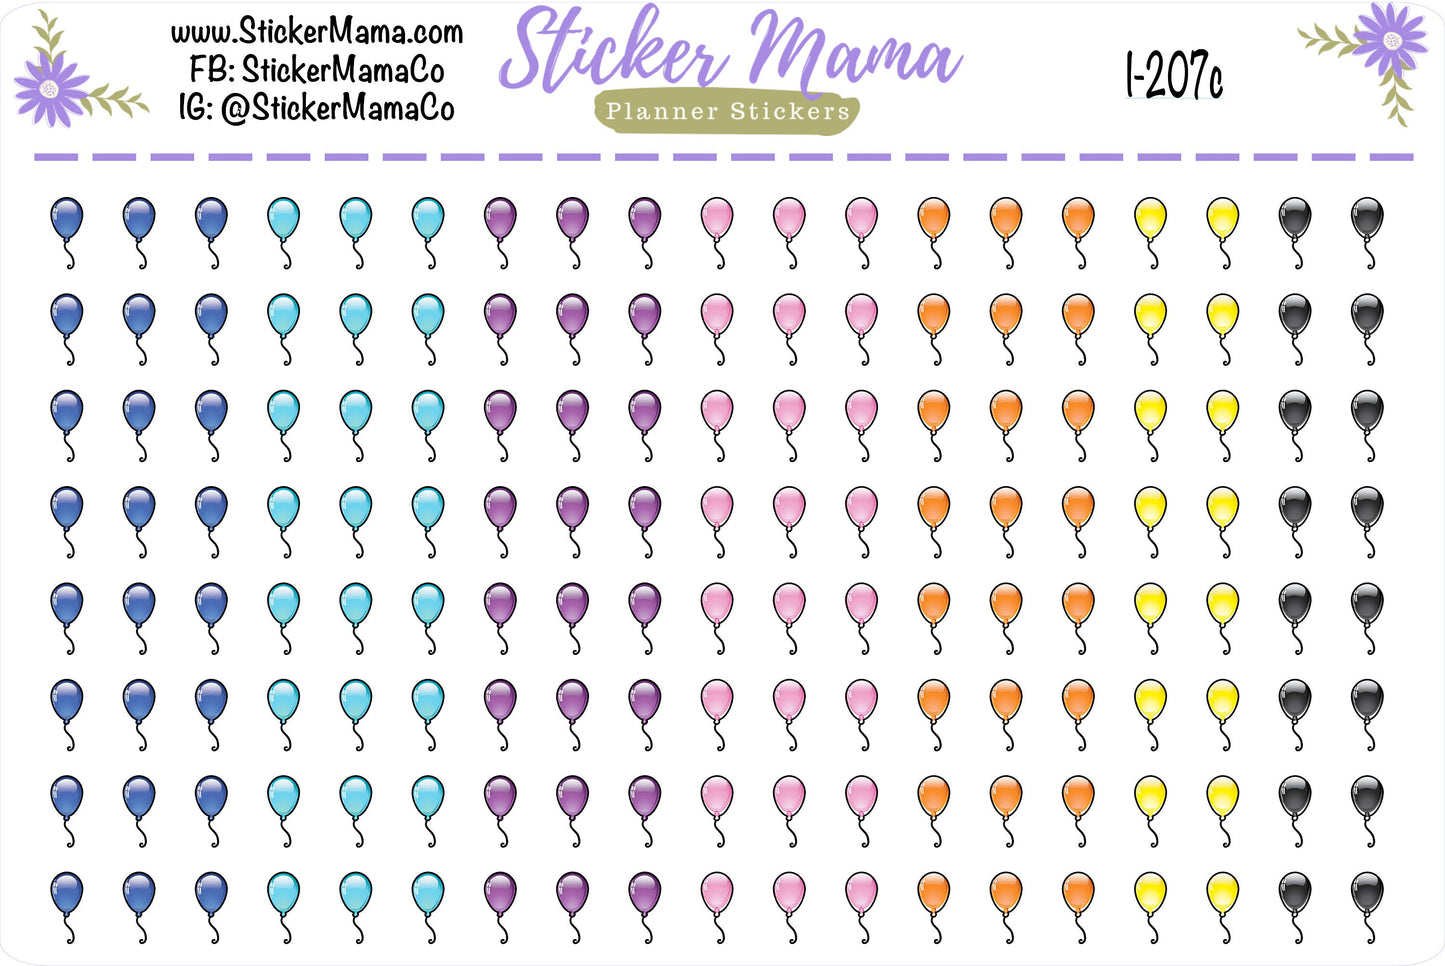 BALLOON PLANNER Stickers I-207 || Balloon Stickers || Stickers for Parties